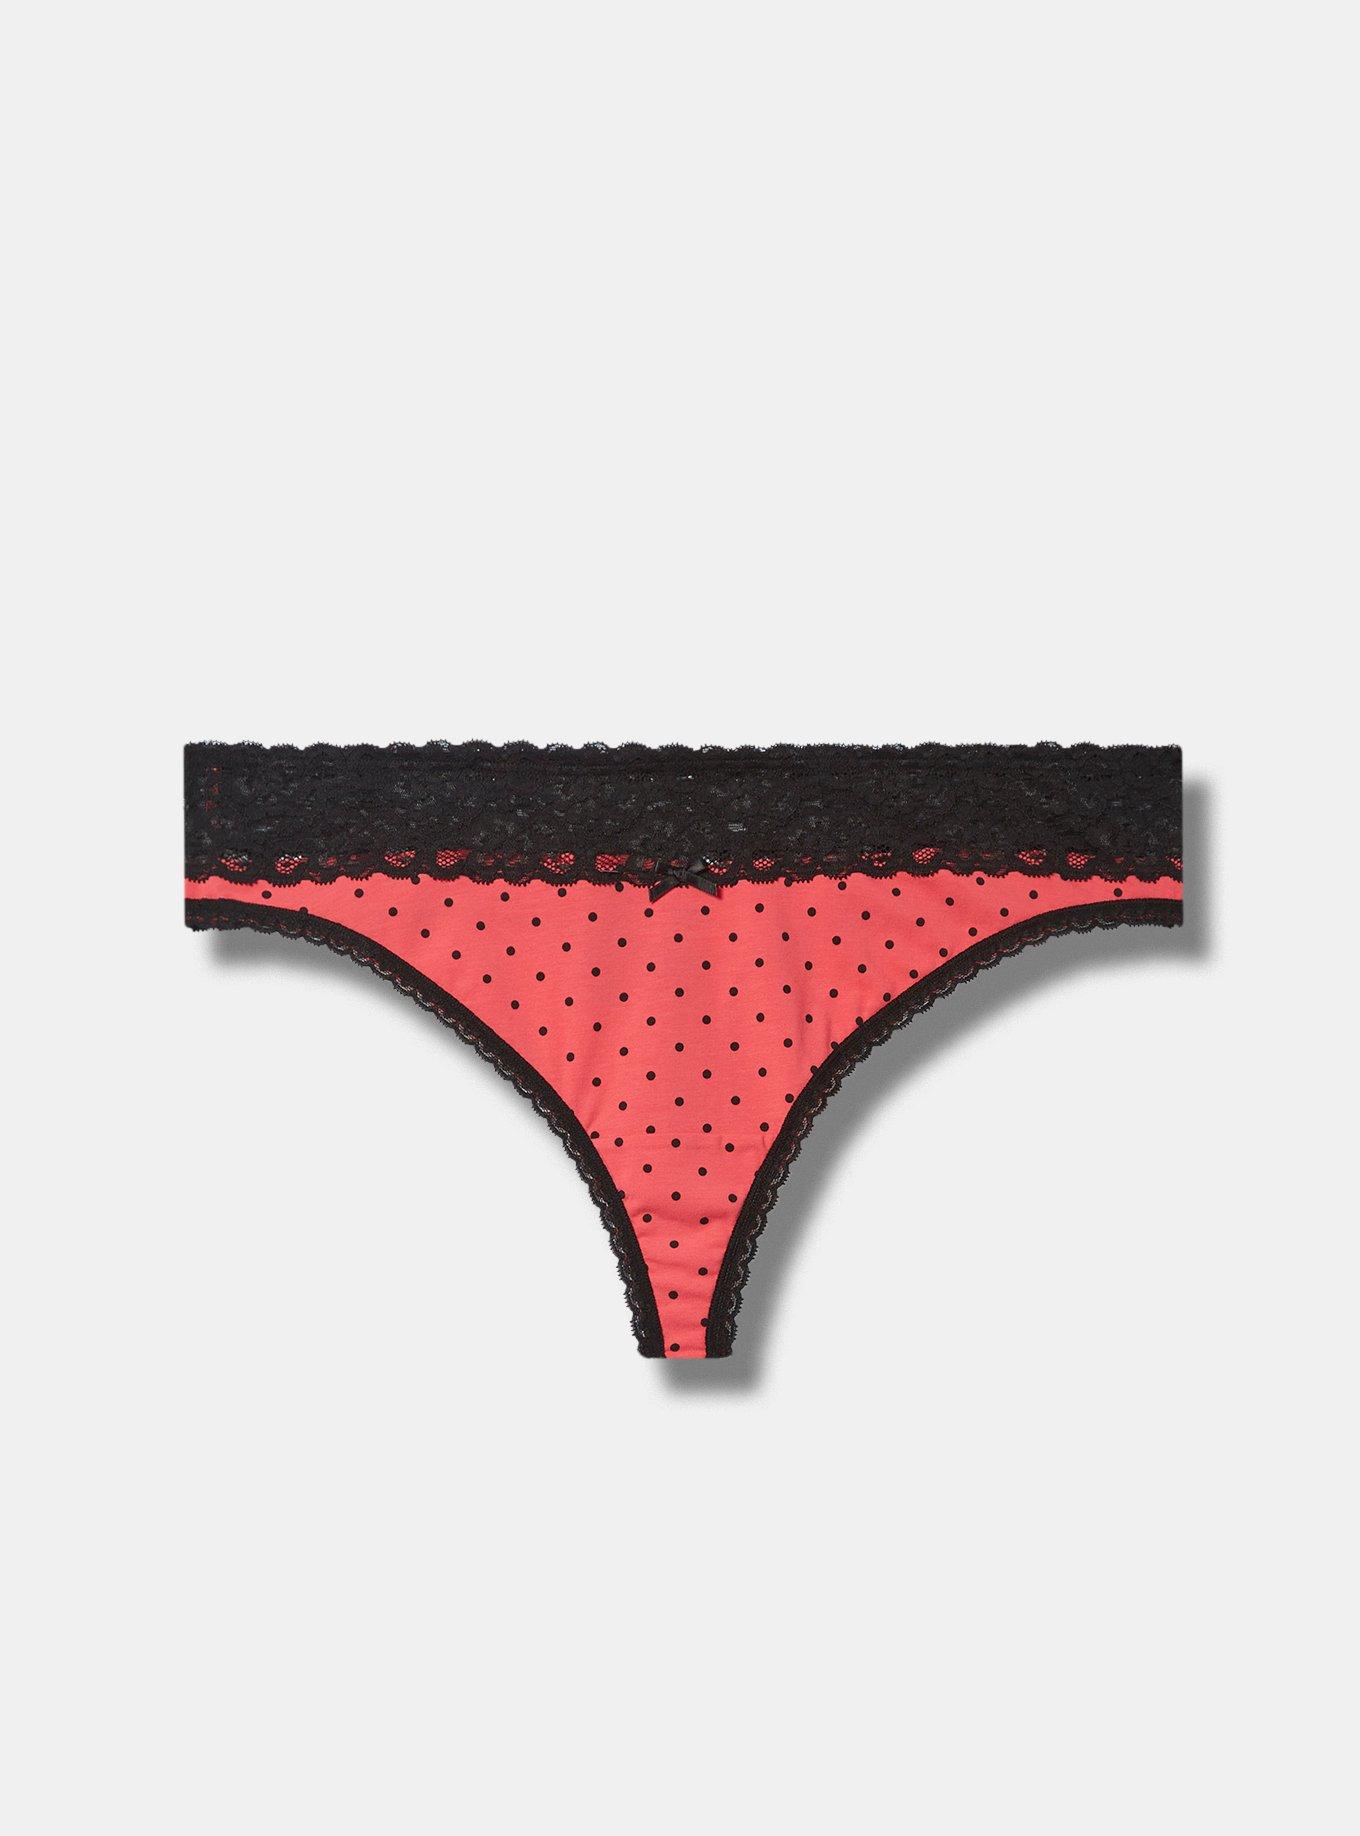 Semi Annual Sale: Panties from $4.99 or 5/$19.99 M/L L